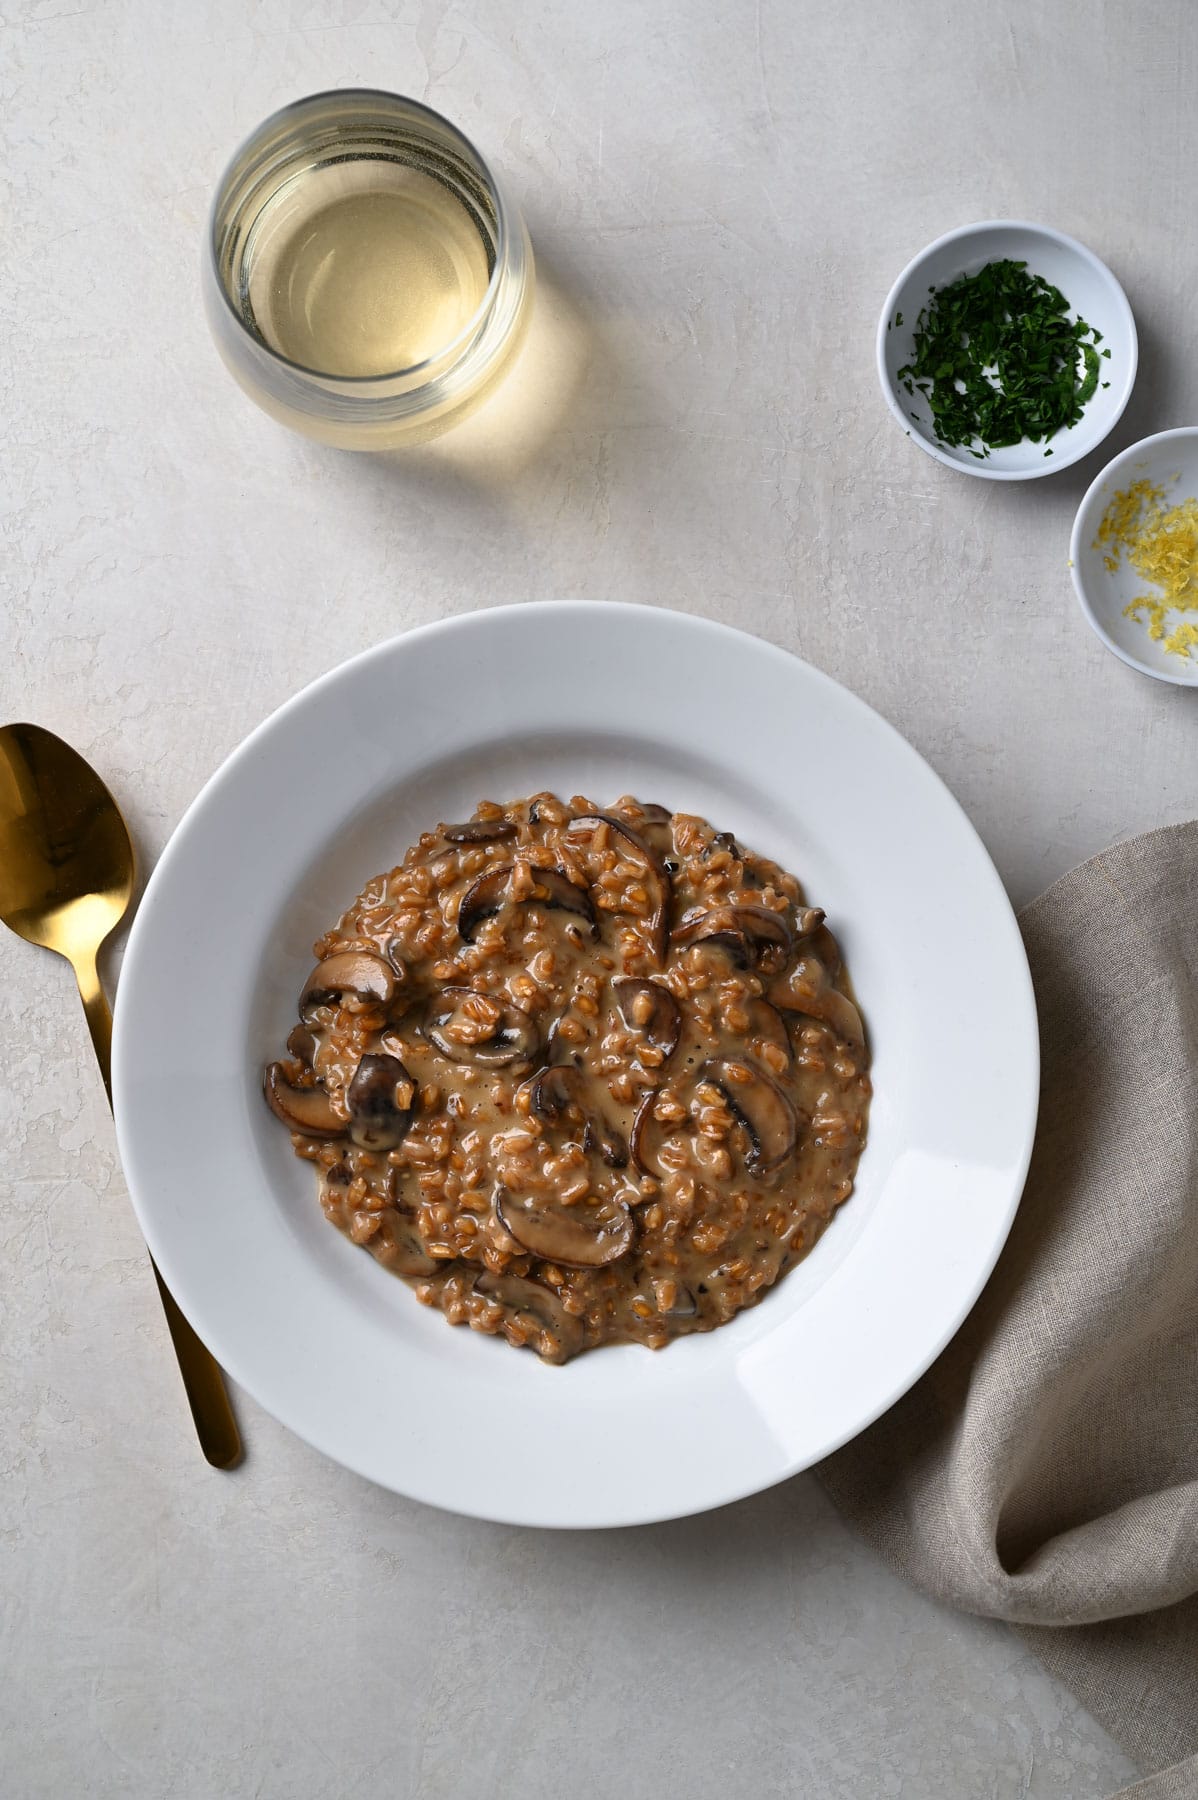 Overhead view of a bowl of Mushroom Farro Risotto freshly scooped into a serving bowl without any toppings.